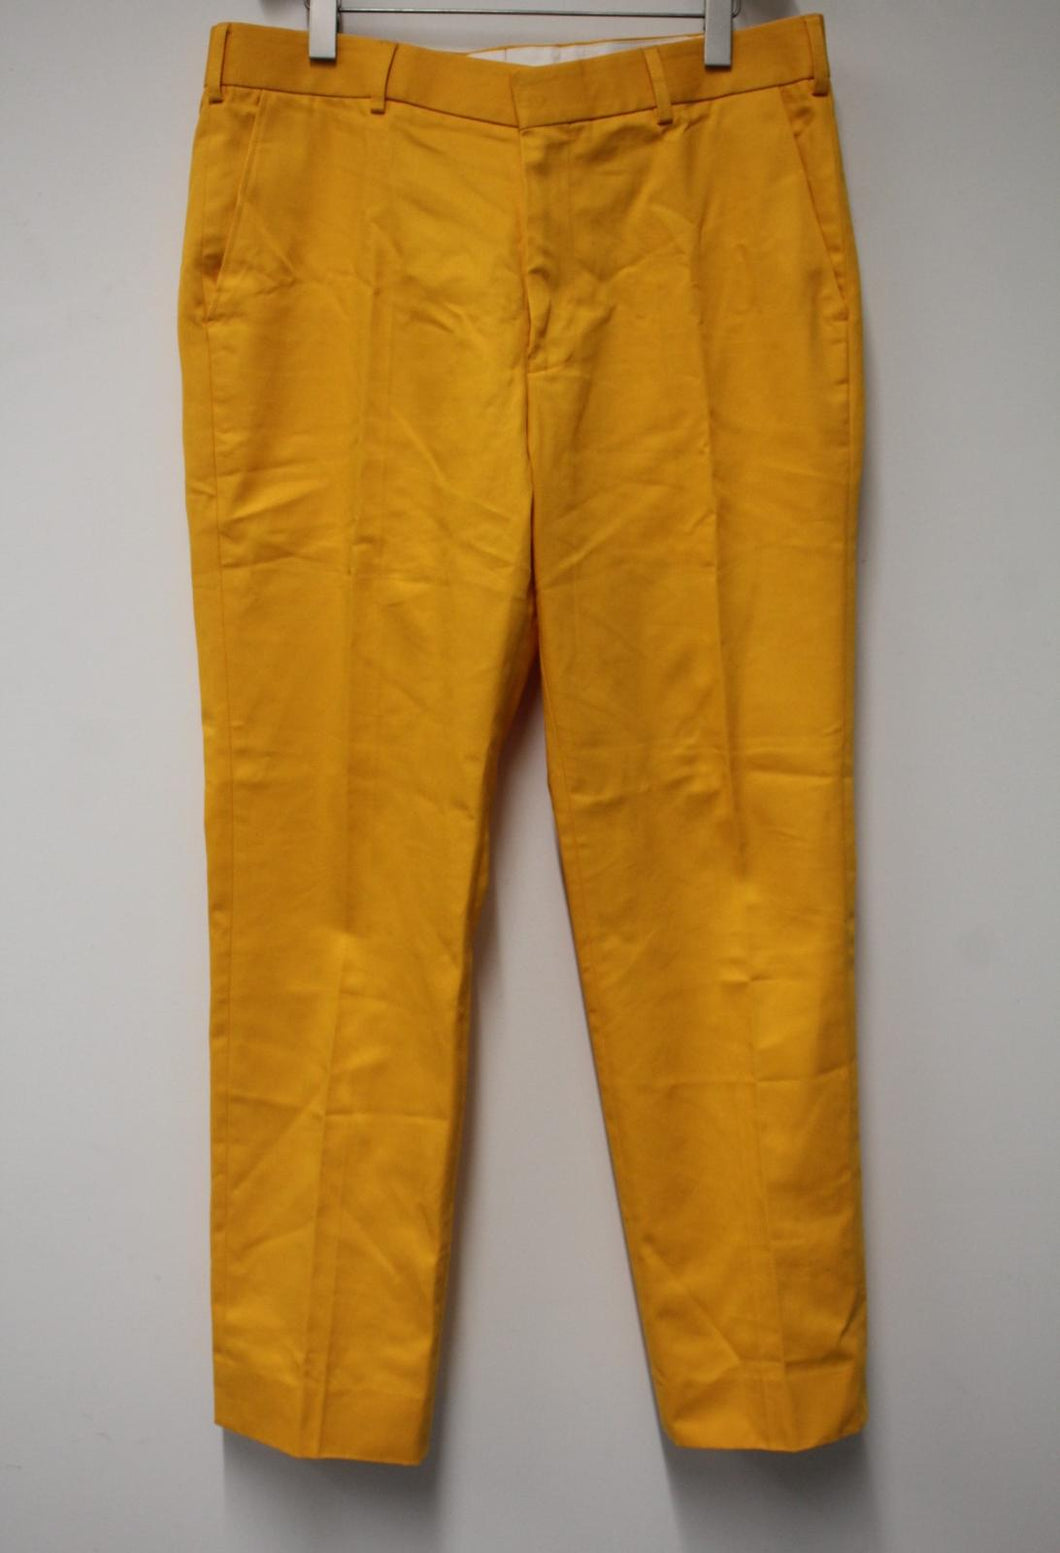 CORDINGS Men's Yellow Cotton Regular Fit Chino Trousers W36 L32 RRP110 NEW